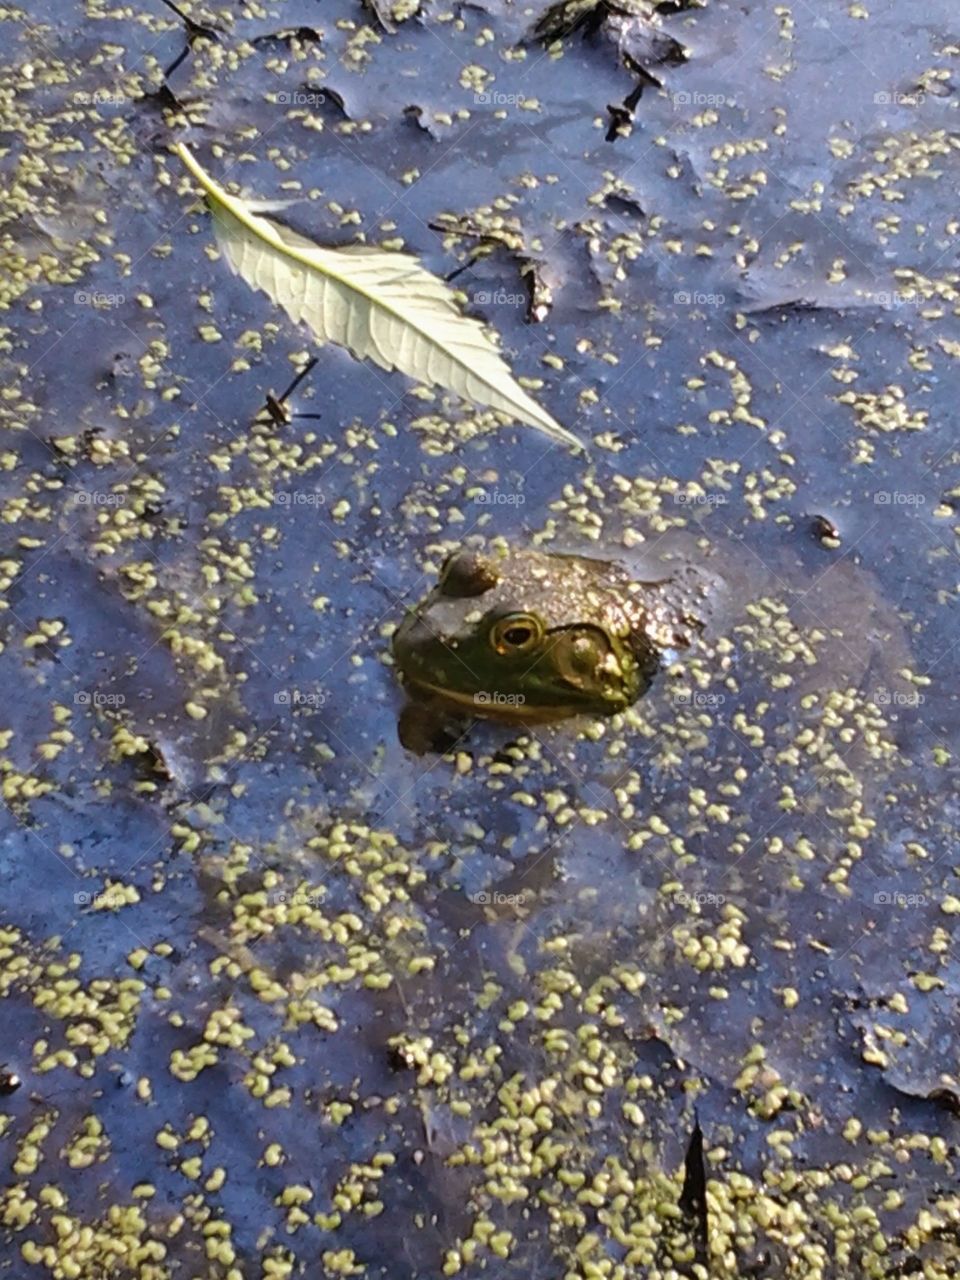 Bull frog . playing at a park with a small pond, we decided to go see the pond and this little guy had his head popped up